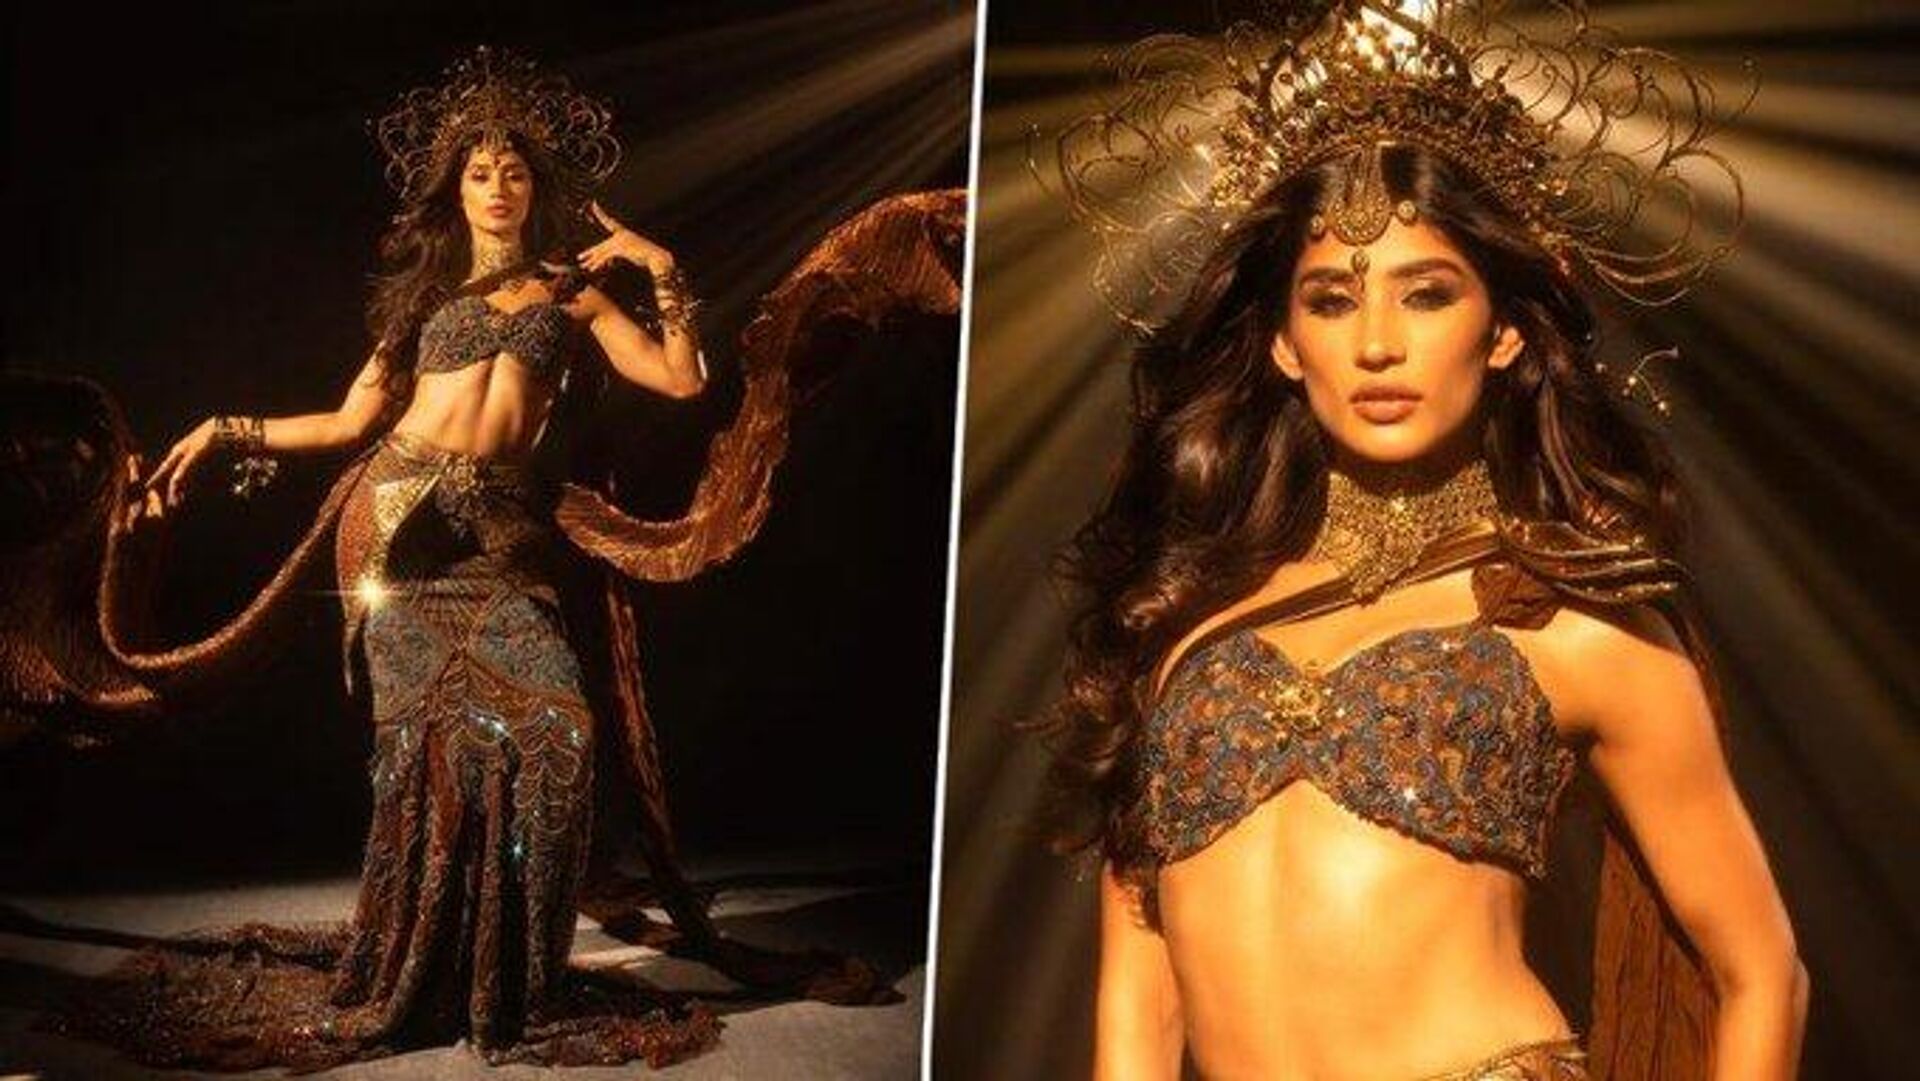 India's Beauty Queen Shweta Sharda Set The Stage on Fire at Miss Universe 2023 - Sputnik India, 1920, 17.11.2023